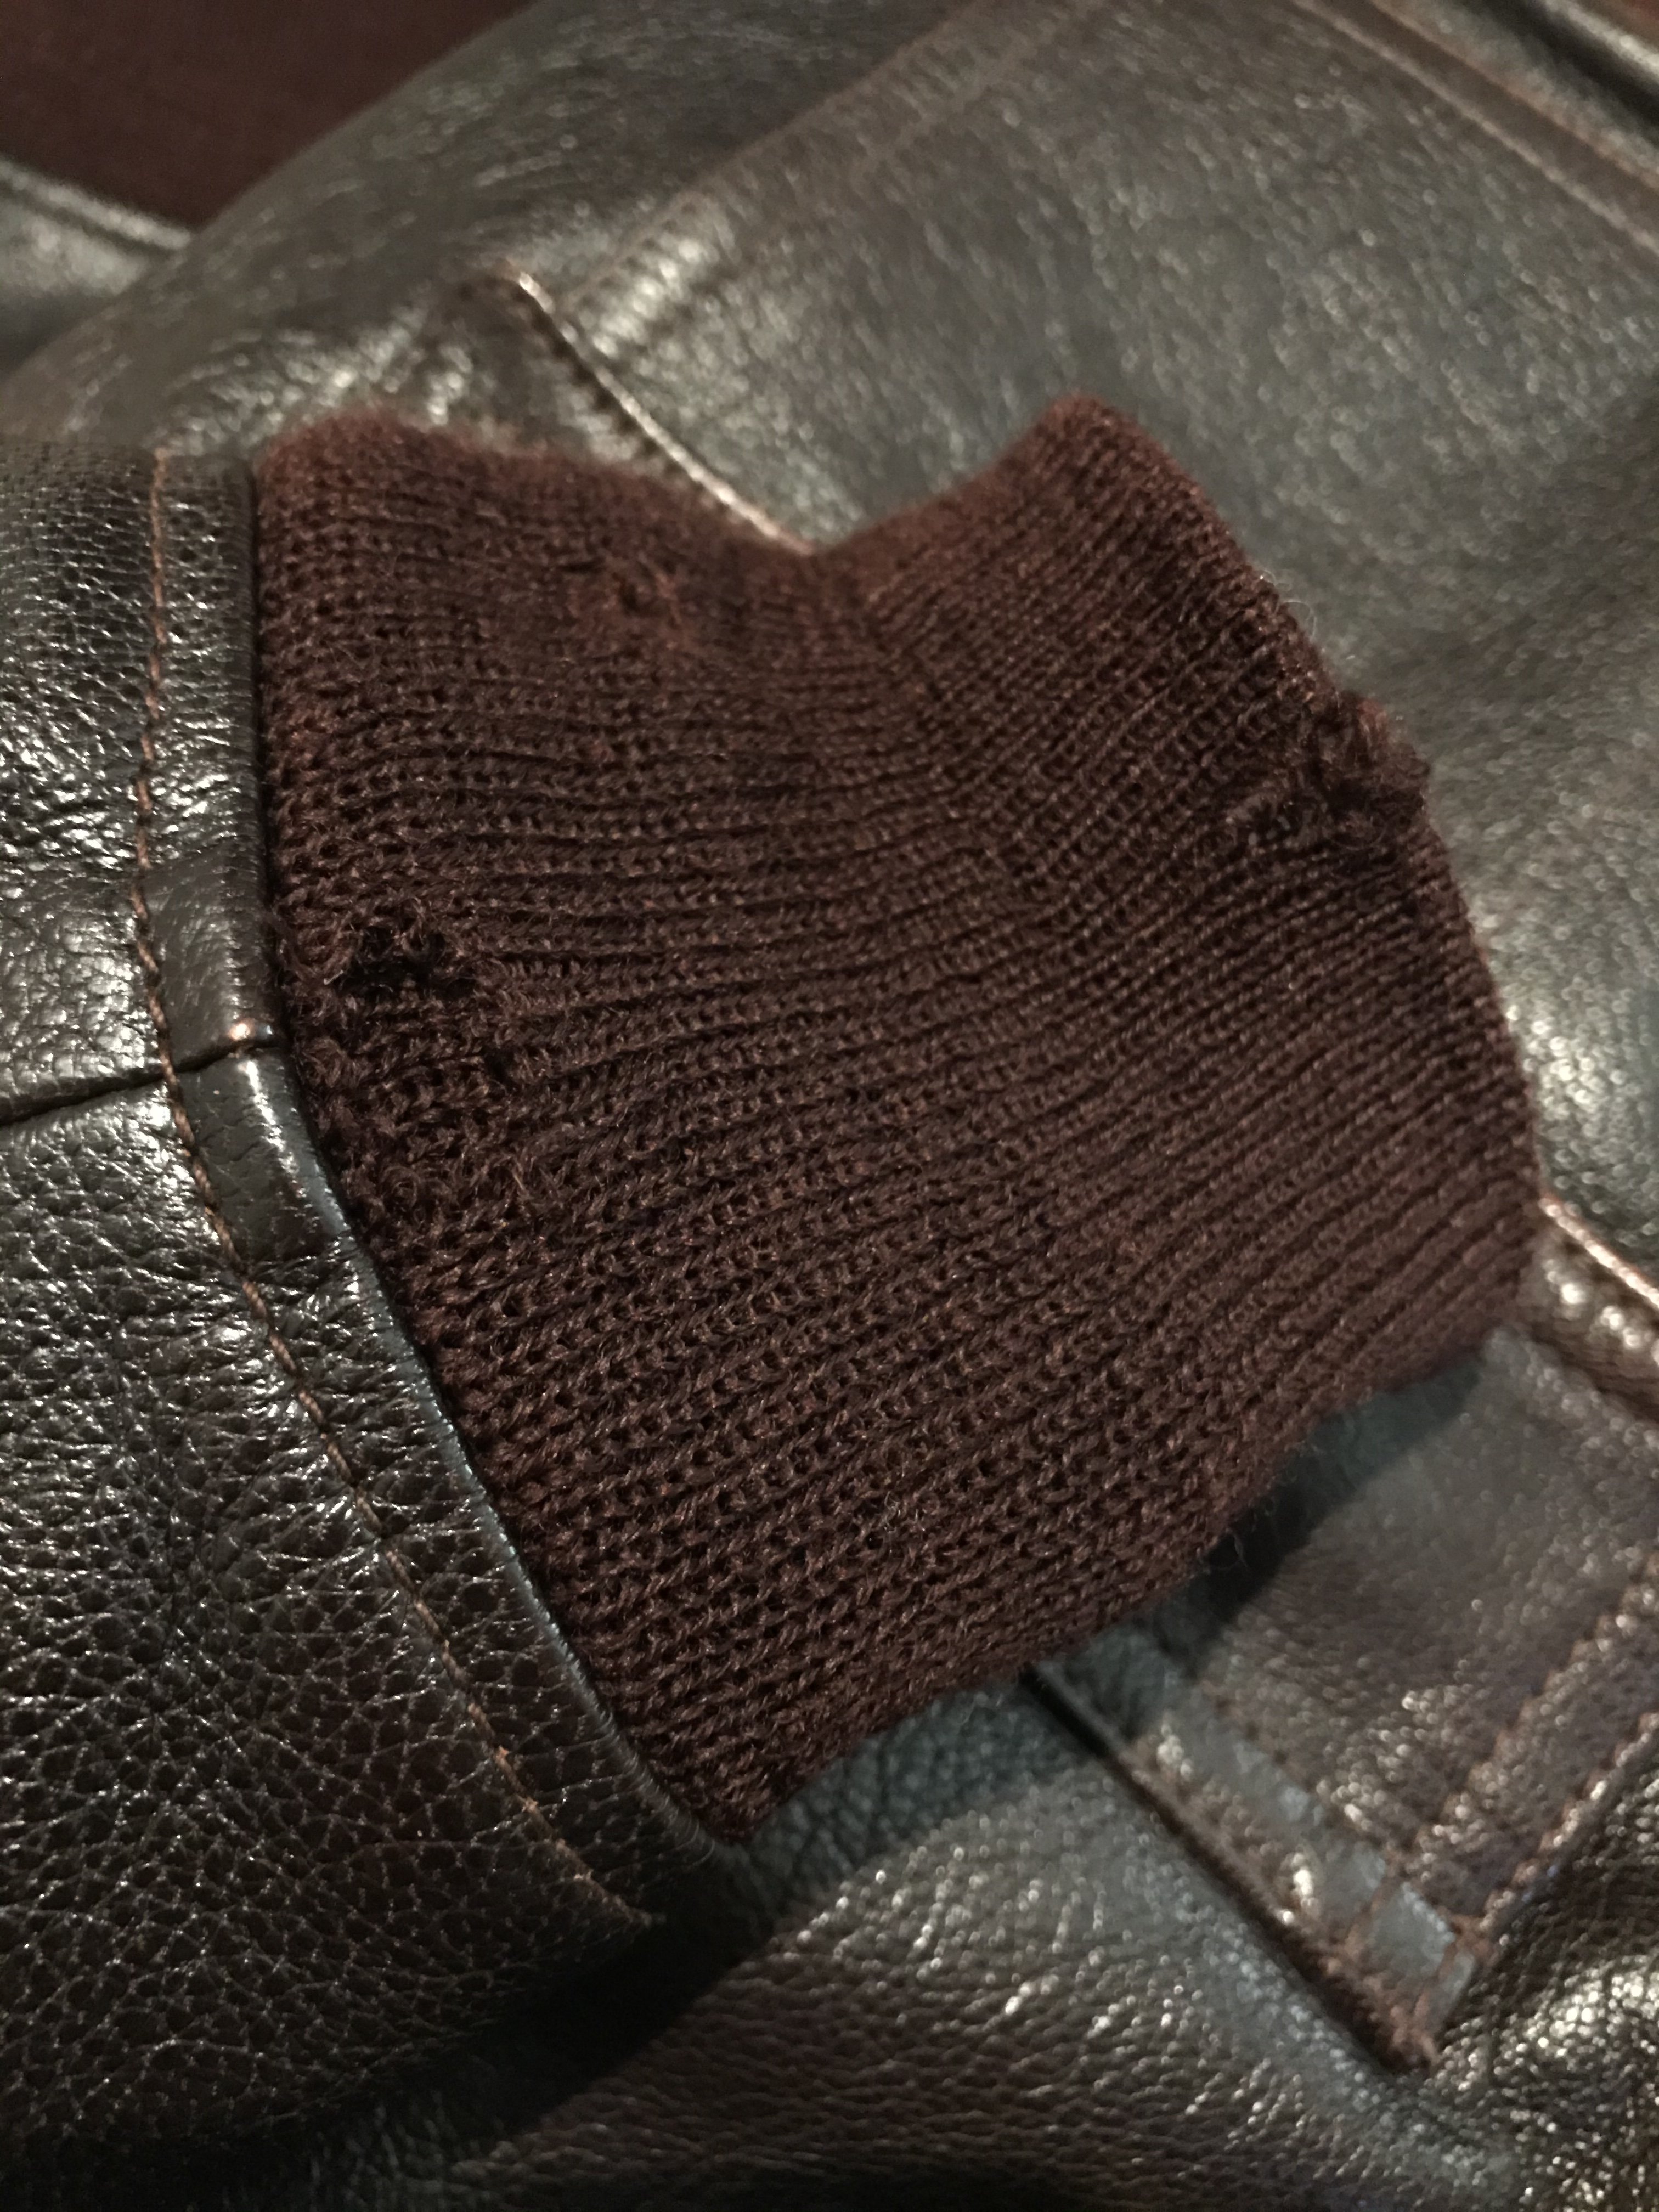 Knit Cuffs for Jackets, Replacement Cuffs for Jackets